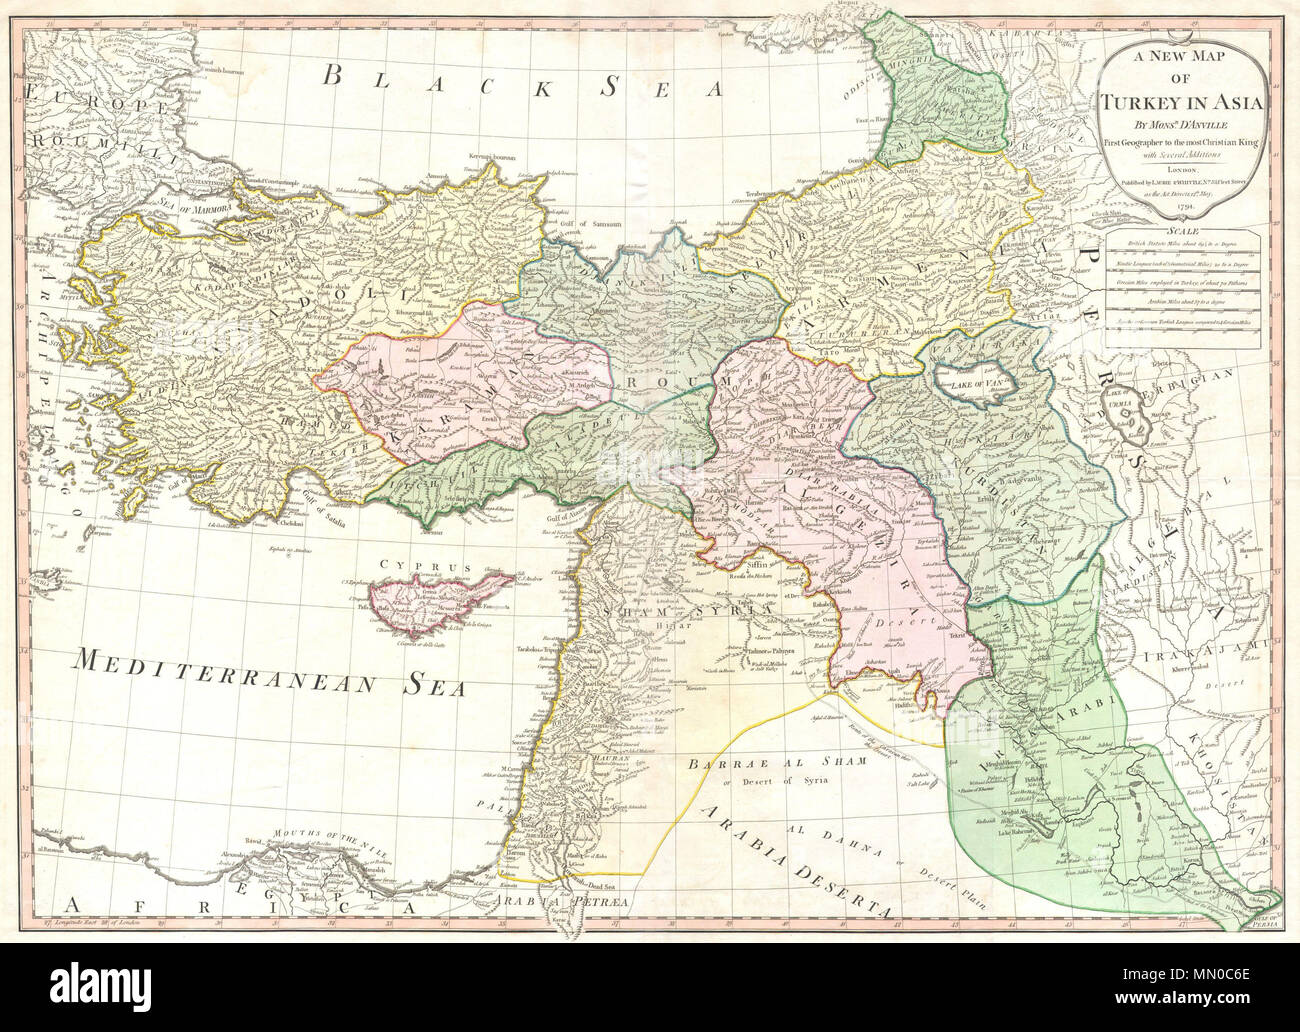 .  English: This is a stunning large format map of Turkey in Asia by the French cartographer and geographer J. B. d’Anville. Depicts the whole of Turkey as well as the modern day Holy Land (Israel / Palestine), Syria, Lebanon, Jordan, Iraq, Kurdistan, Armenia and Georgia. Inland details are prolifically notated and include such curiosities as ancient ruins, abandoned castles, caravan routes, and oases. Published by Laurie and Whittle of Fleet St. London for the 1794 English Edition of d’Anville’s atlas. Text in English.  A New Map of Turkey in Asia.. 1794. 1794 d'Anville Map of Turkey, Iraq an Stock Photo